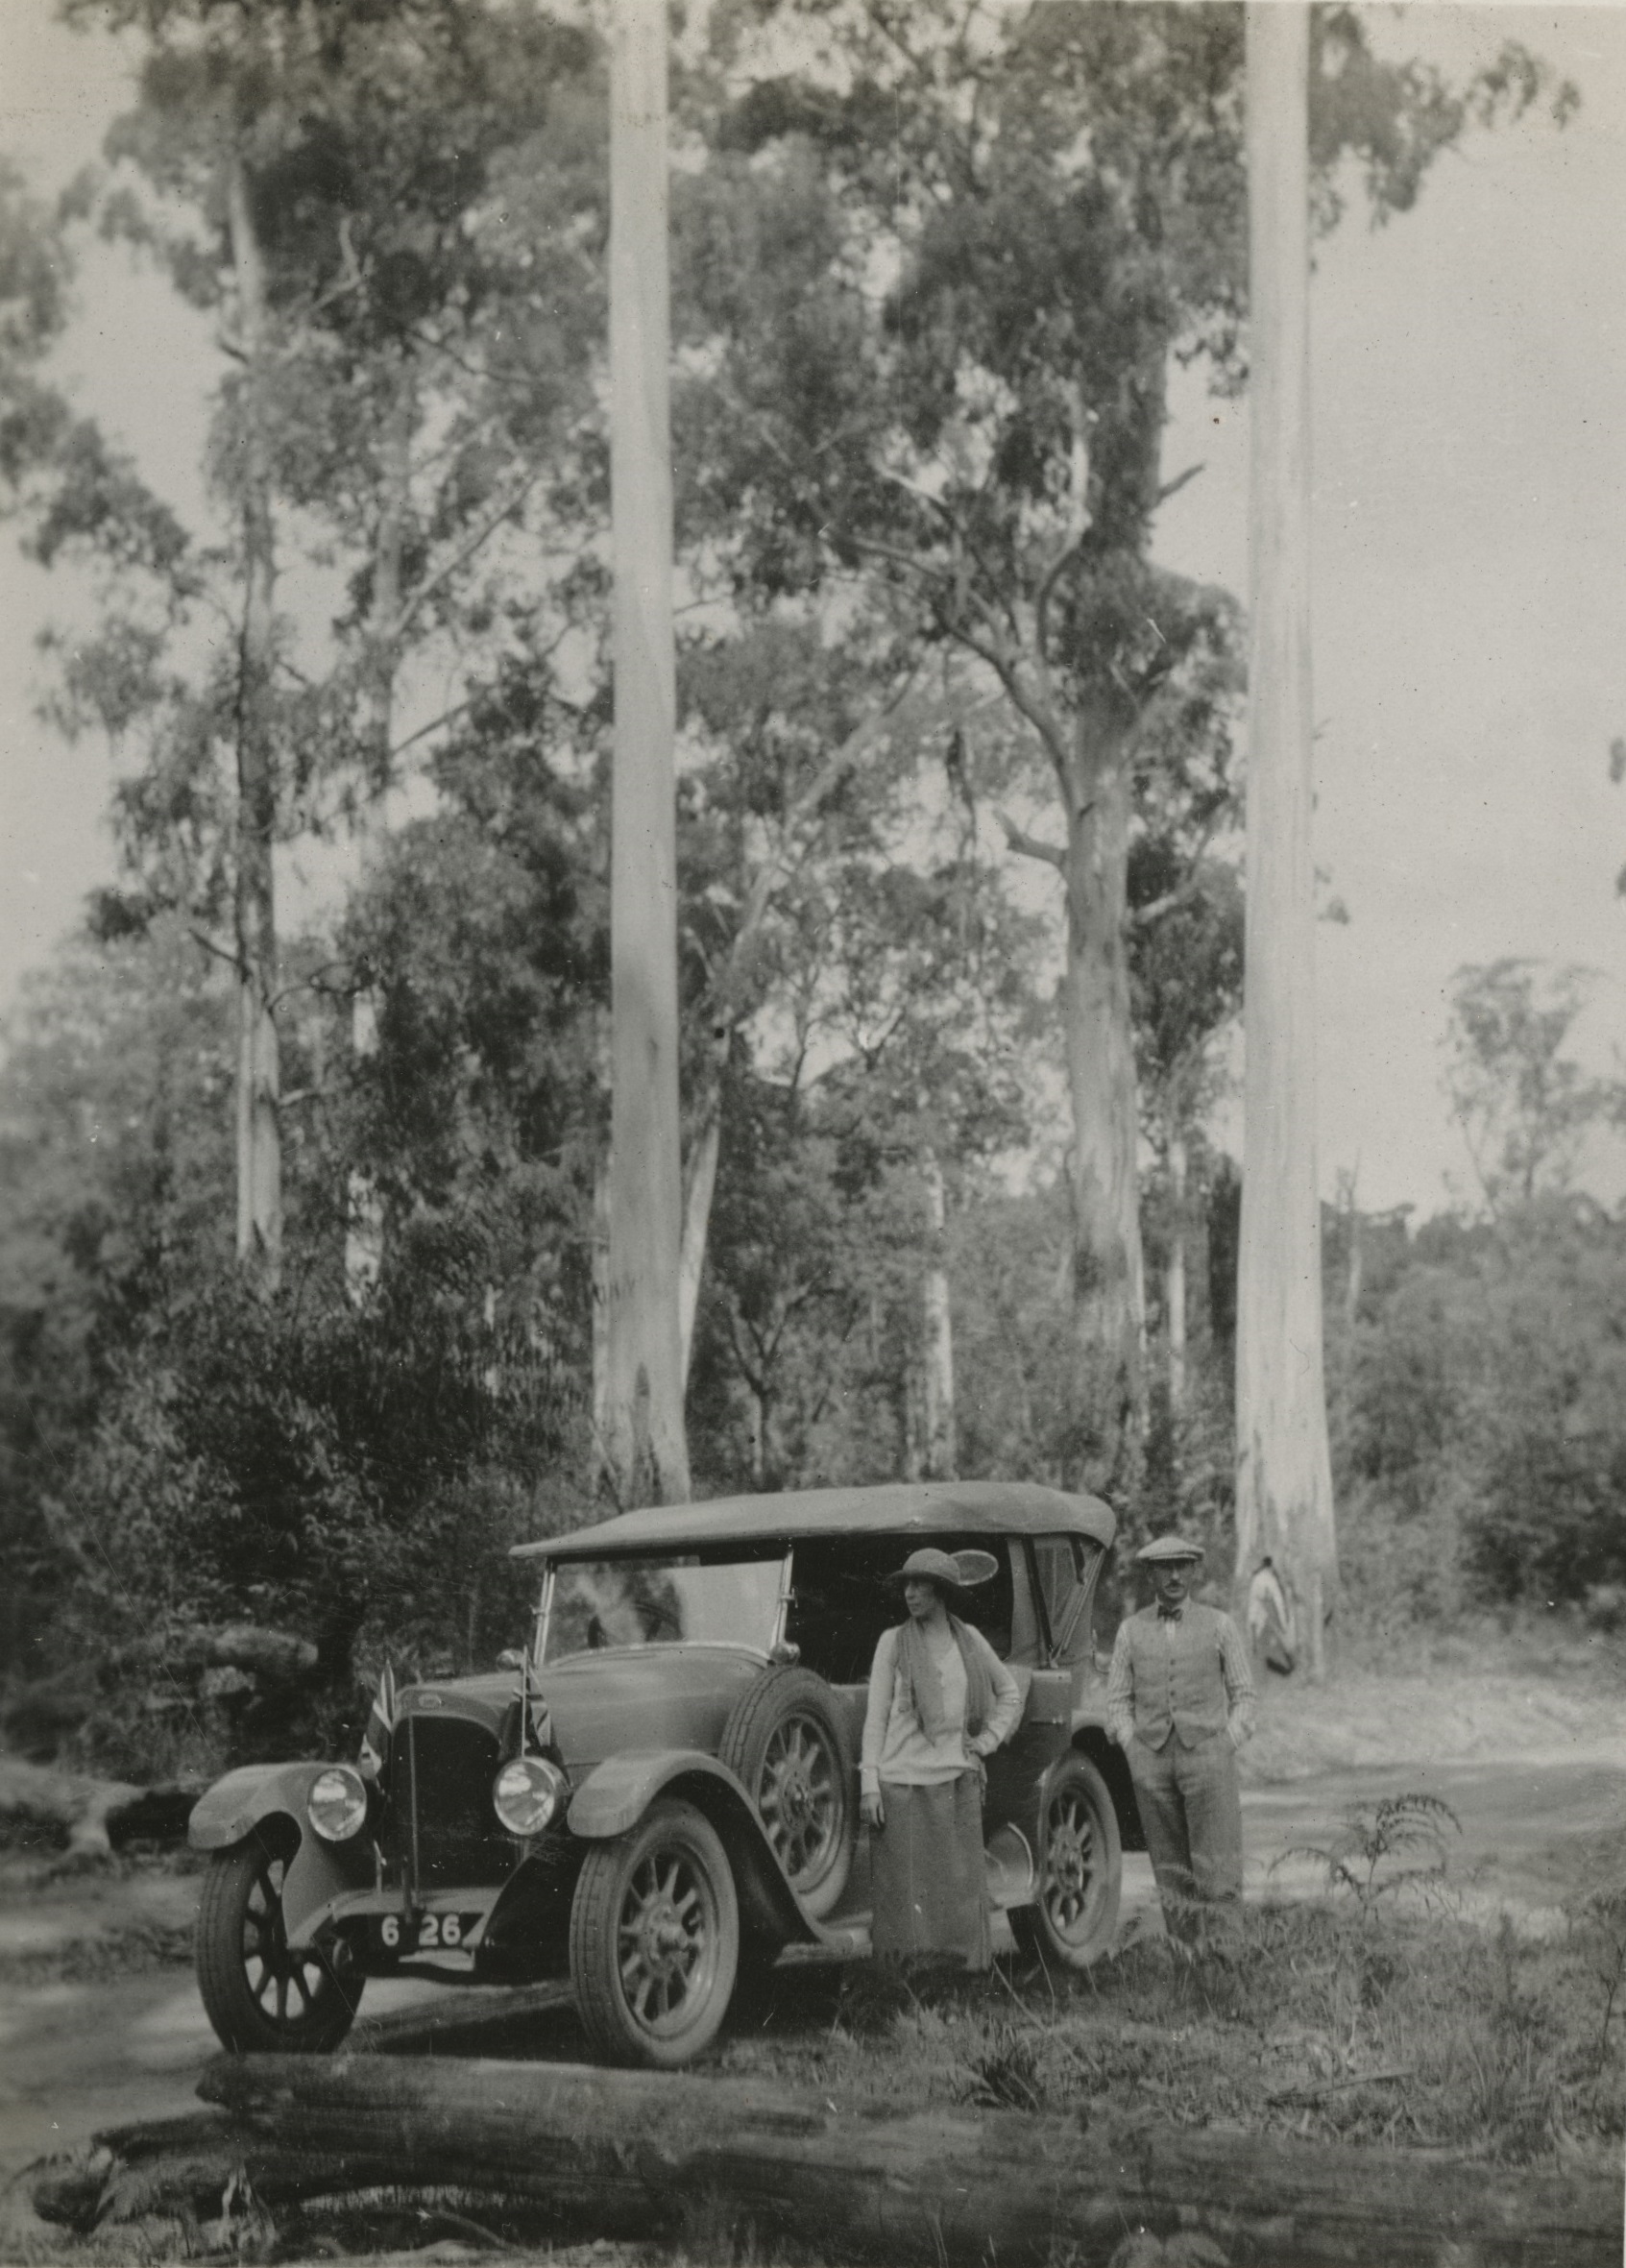 Car parked in Australian bush surrounded by tall standing trees and fallen trees, man and woman standing in front of car